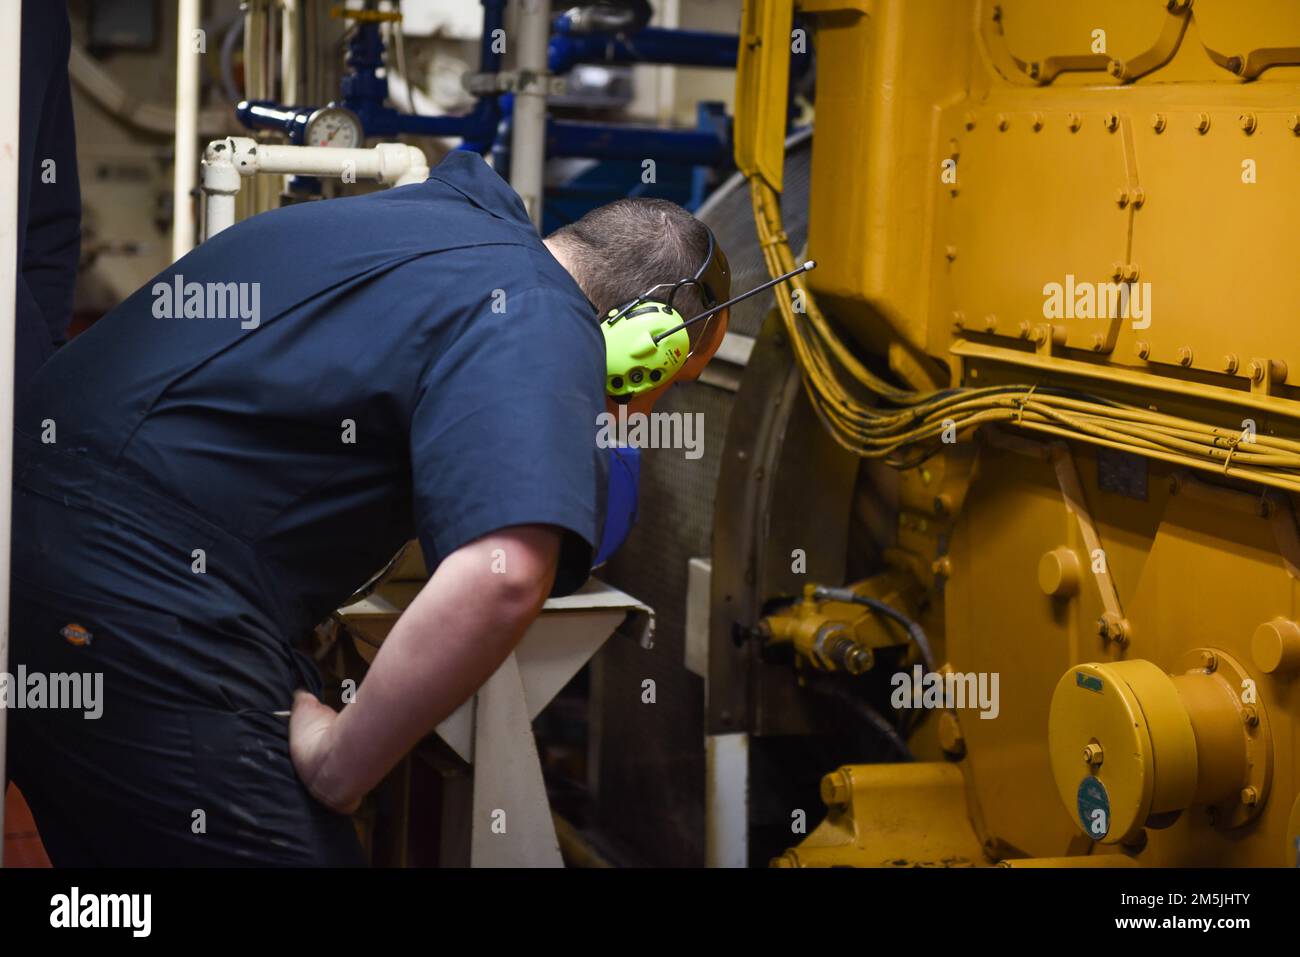 U.S. Coast Guard Petty Officer 3rd Class Frank Aurelio, an Electricians Mate aboard Coast Guard Cutter Spar, checks the engine while underway in the Atlantic Ocean, March 19, 2022. Spar and her crew are traveling to Duluth, Minn. after a year-long maintenance period in Baltimore. Stock Photo